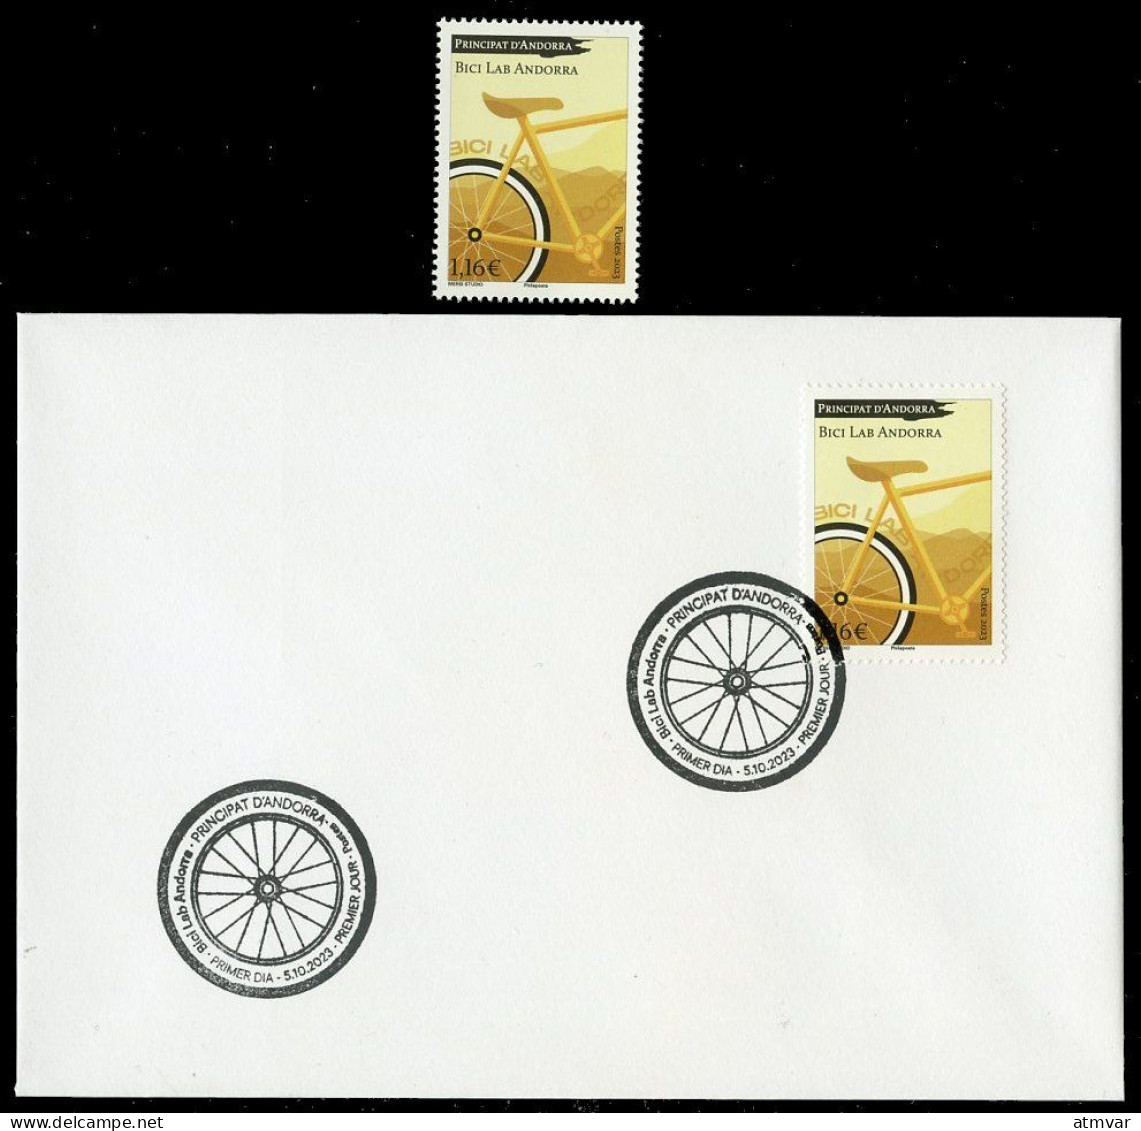 ANDORRA Postes (2023) Bici Lab Andorra, Bicicleta, Bicyclette, Bicycle, Fahrrad, Fiets - First Day Cover + Stamp - Sammlungen